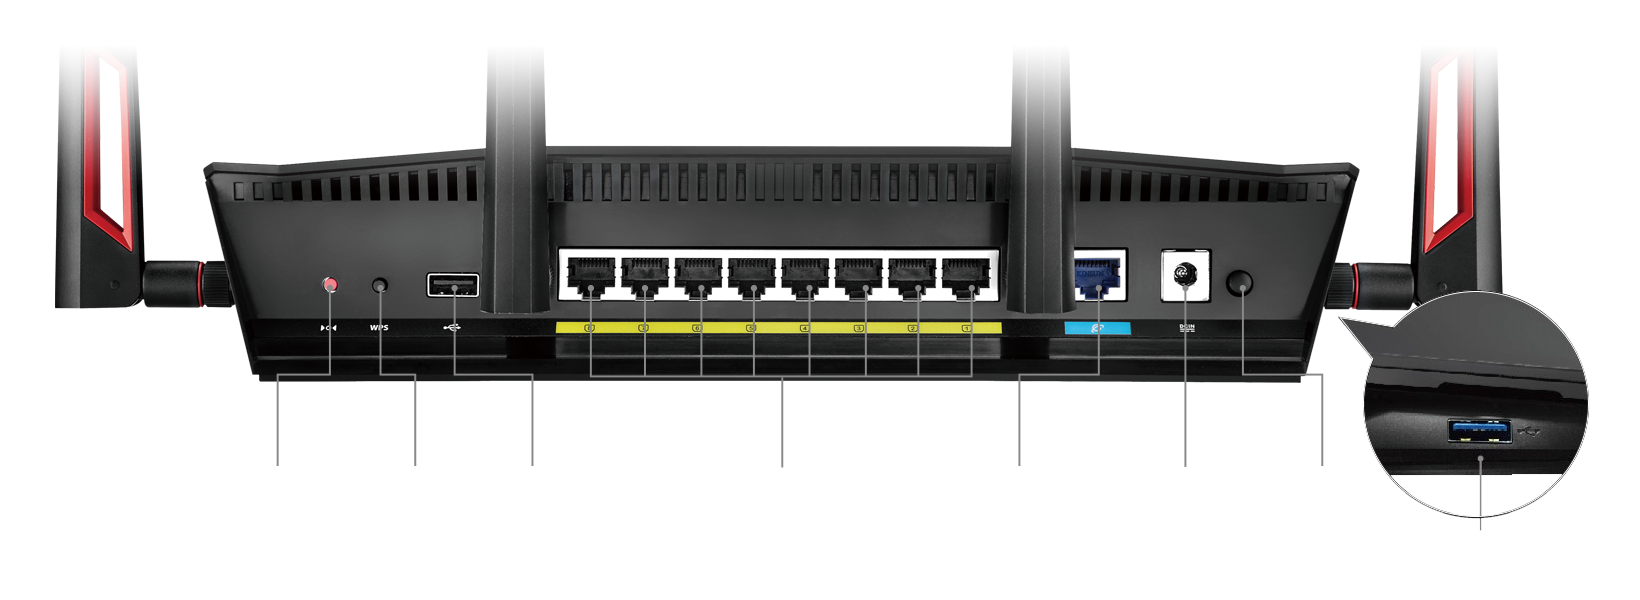 8 Gigabit LAN ports – twice the number most routers provide – making RT-AC88U your digital home hub